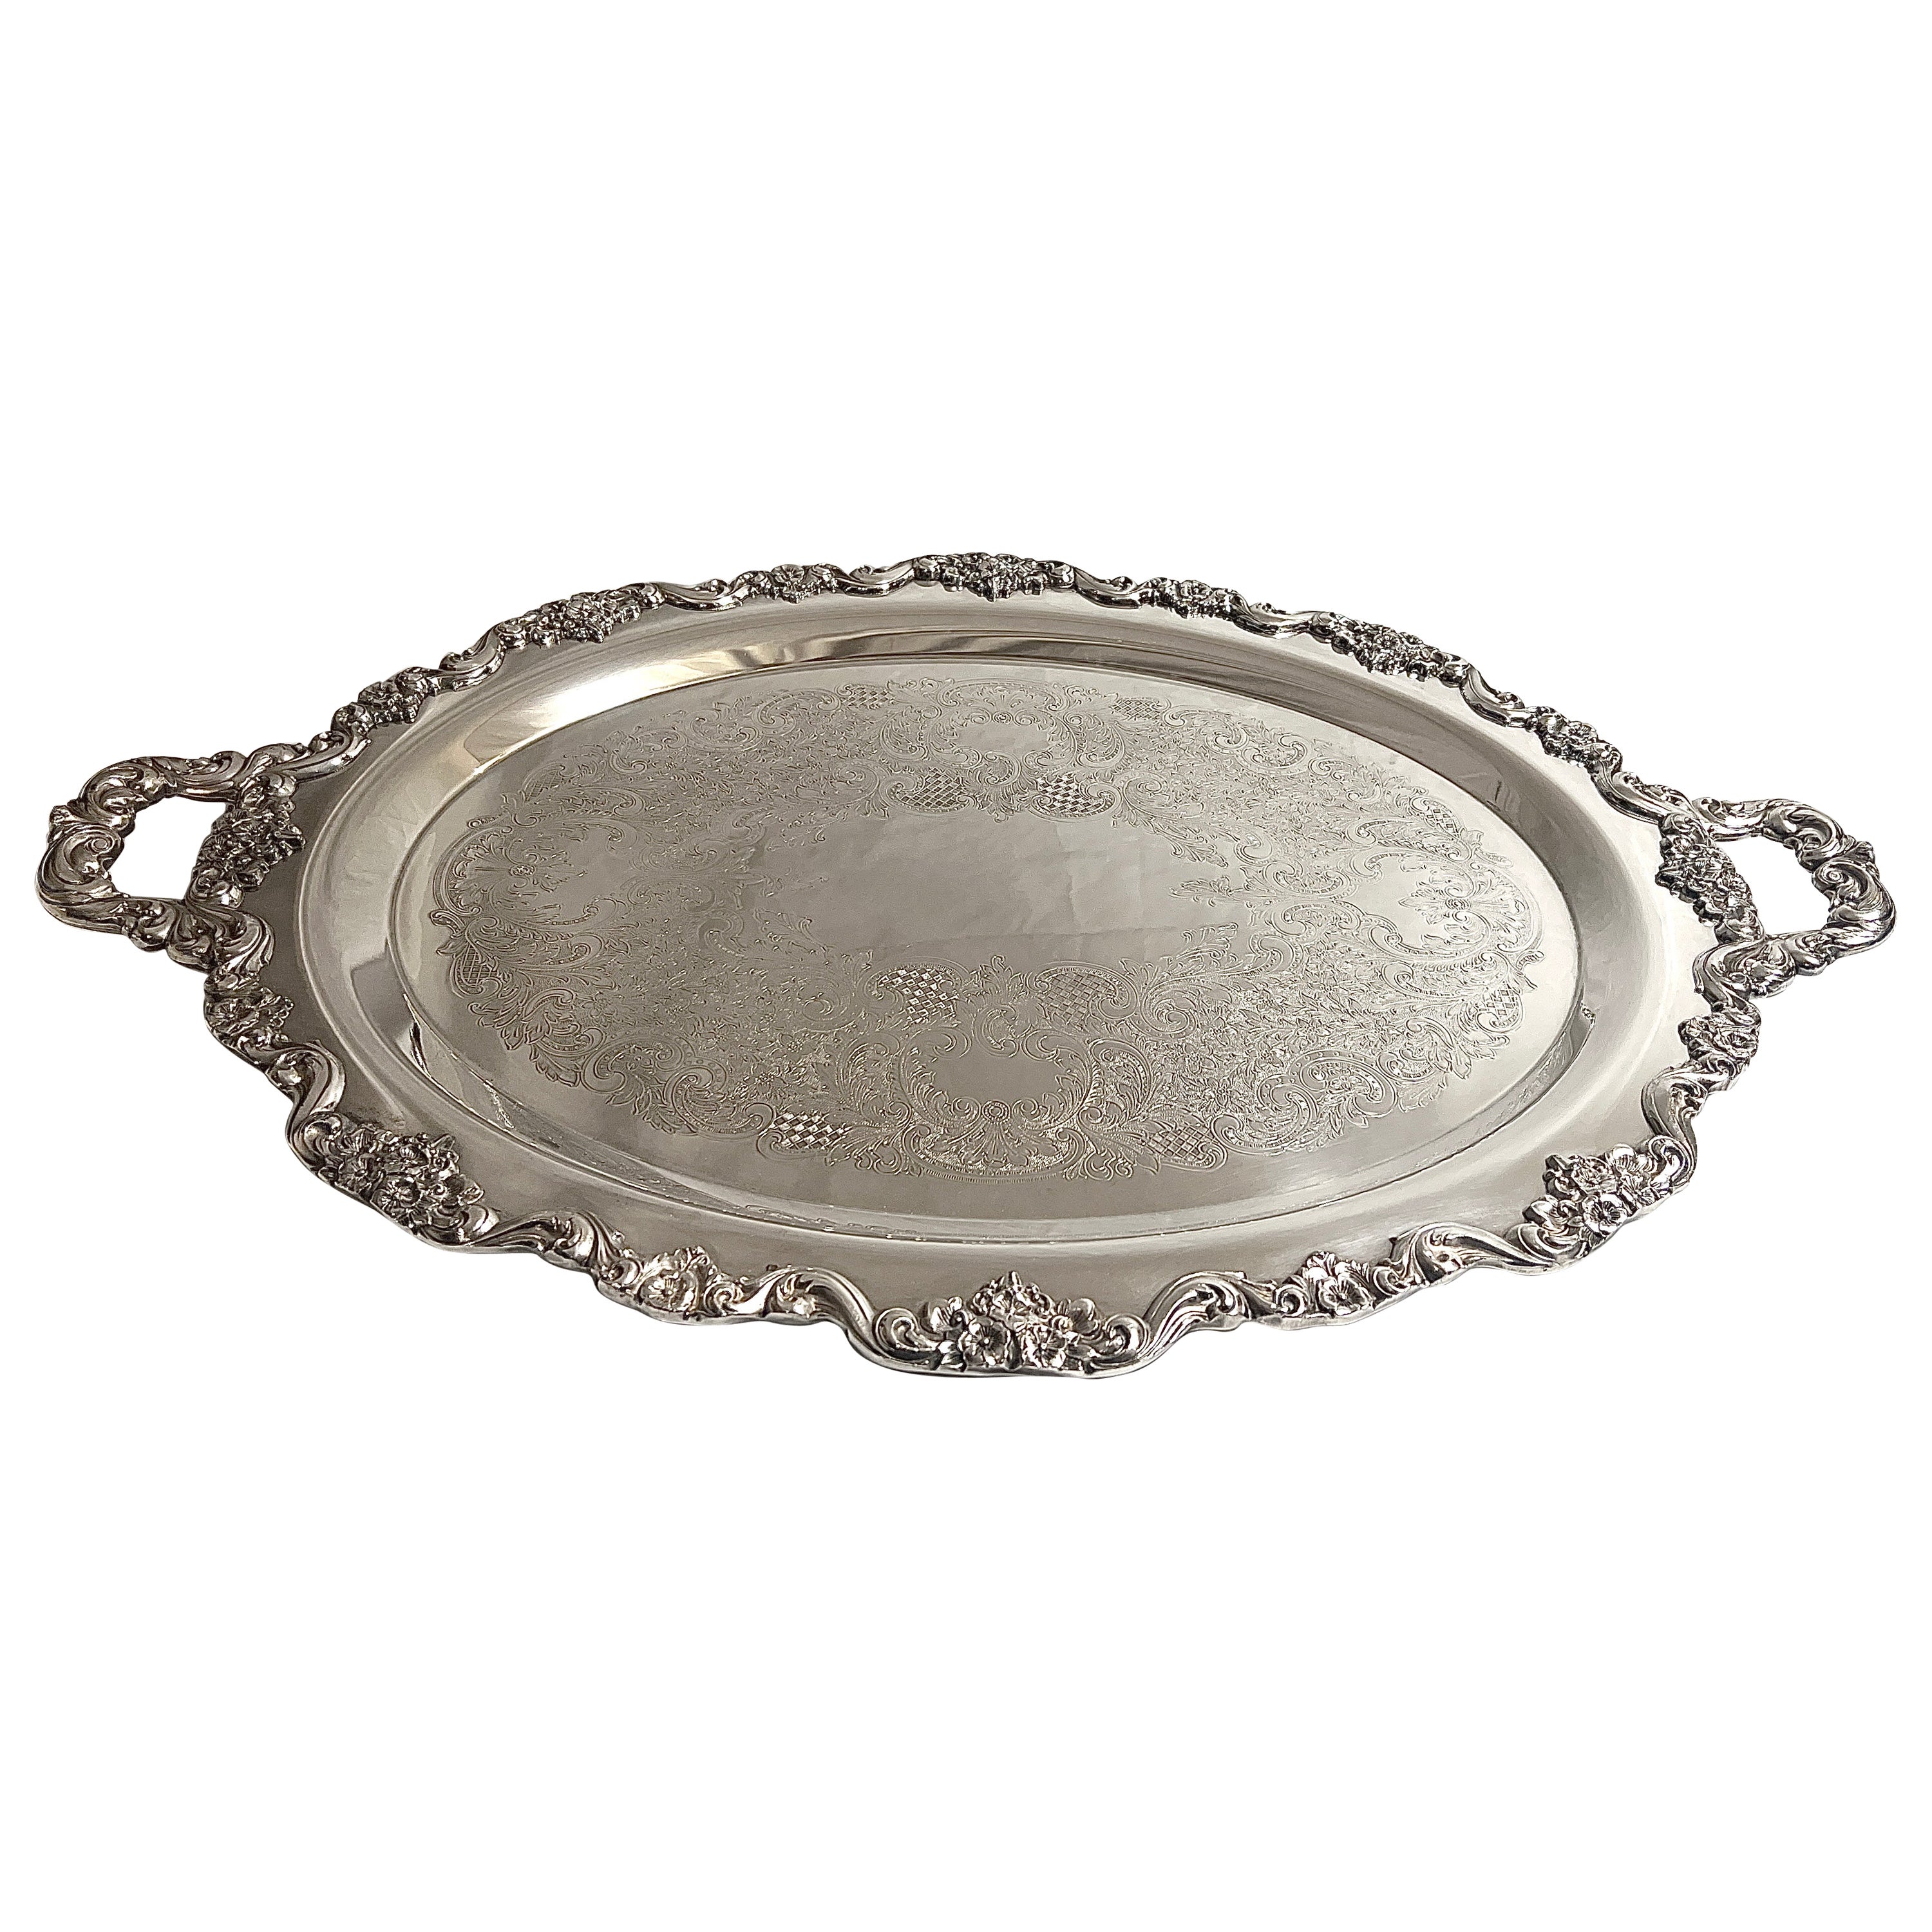 Antique English Sheffield Silver Footed Tray with Rose Border, Circa 1890.